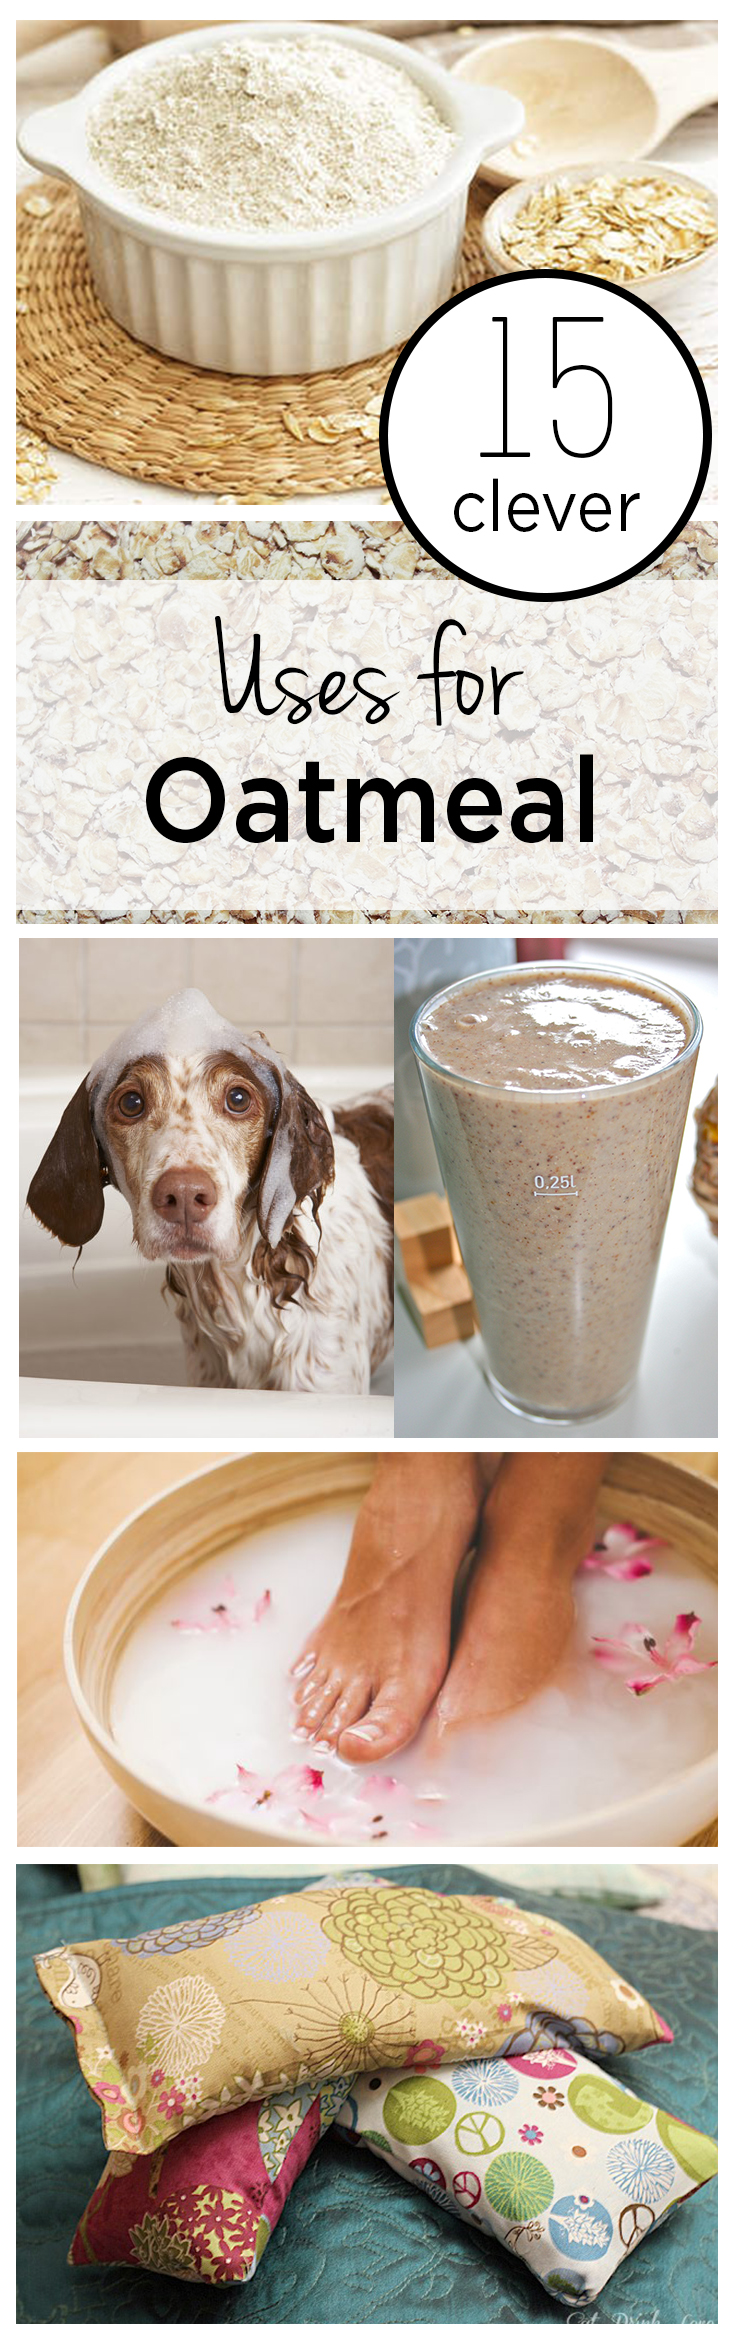 15 Clever Uses for Oatmeal